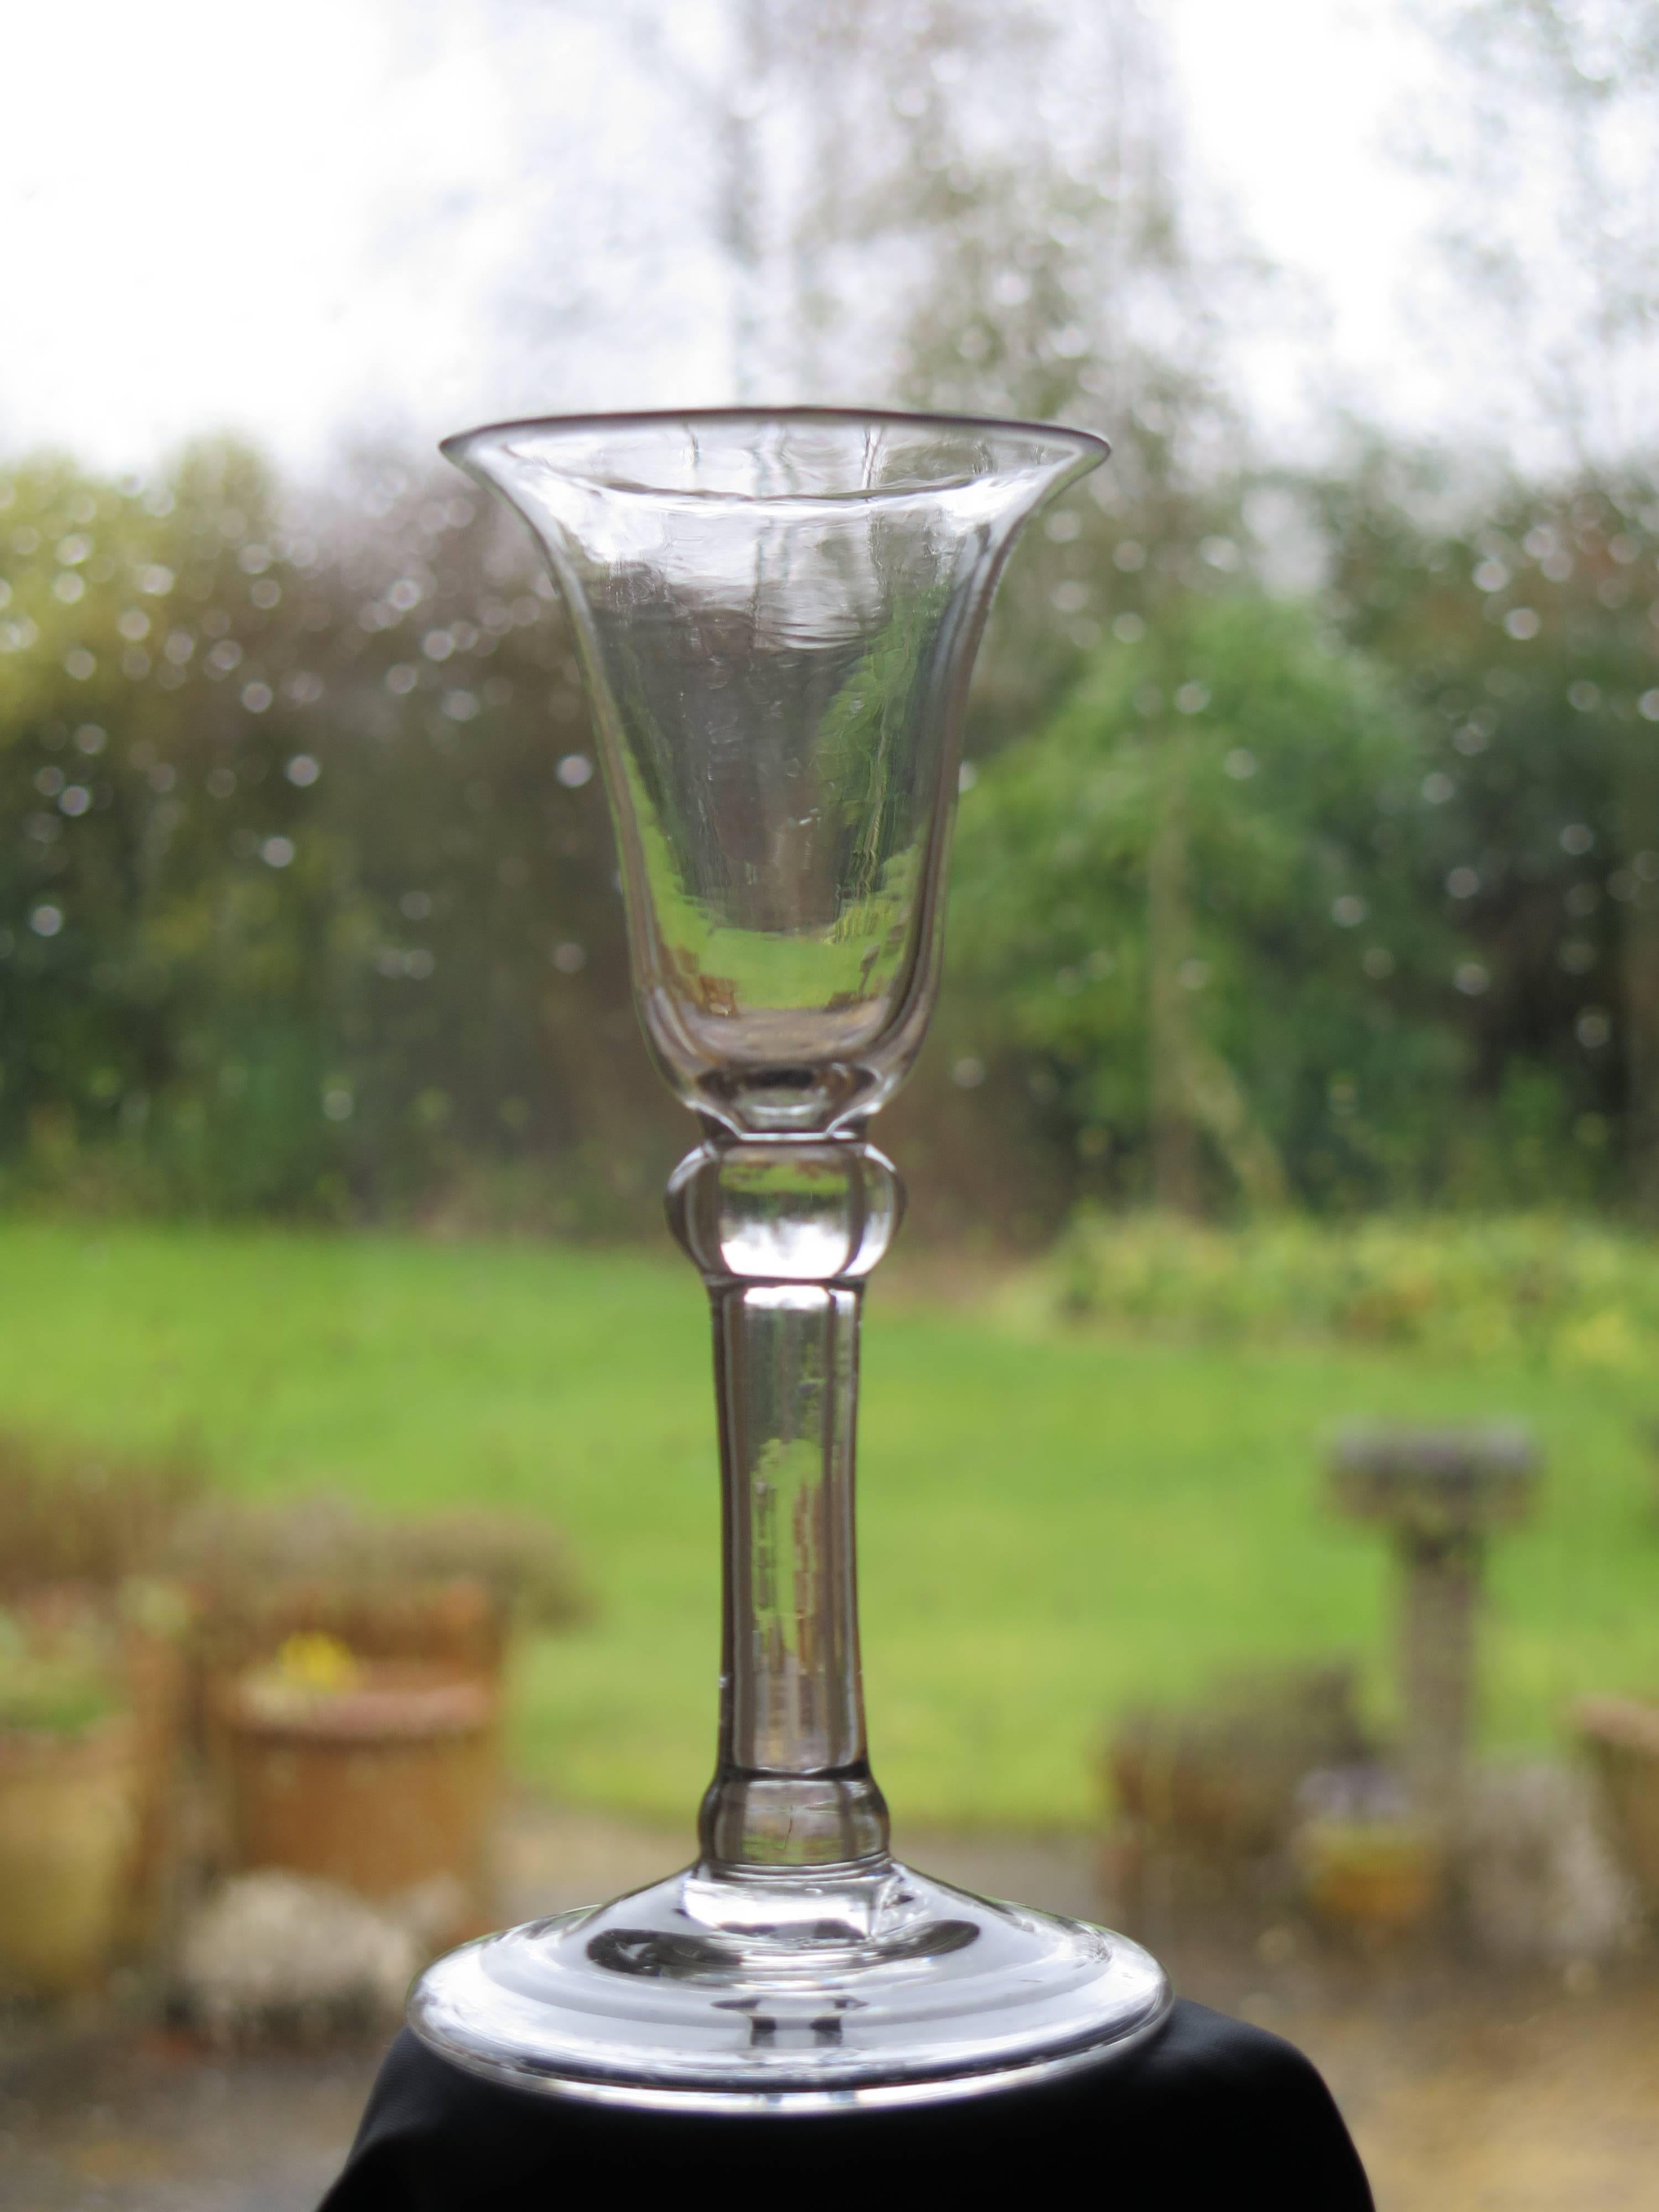 This is a good handblown, English, Georgian, 'Balustroid' wine drinking glass, dating from the middle of the 18th century, George XI period, circa 1740.

It is made from English lead glass which is relatively heavy and has a soft grey colour.

The